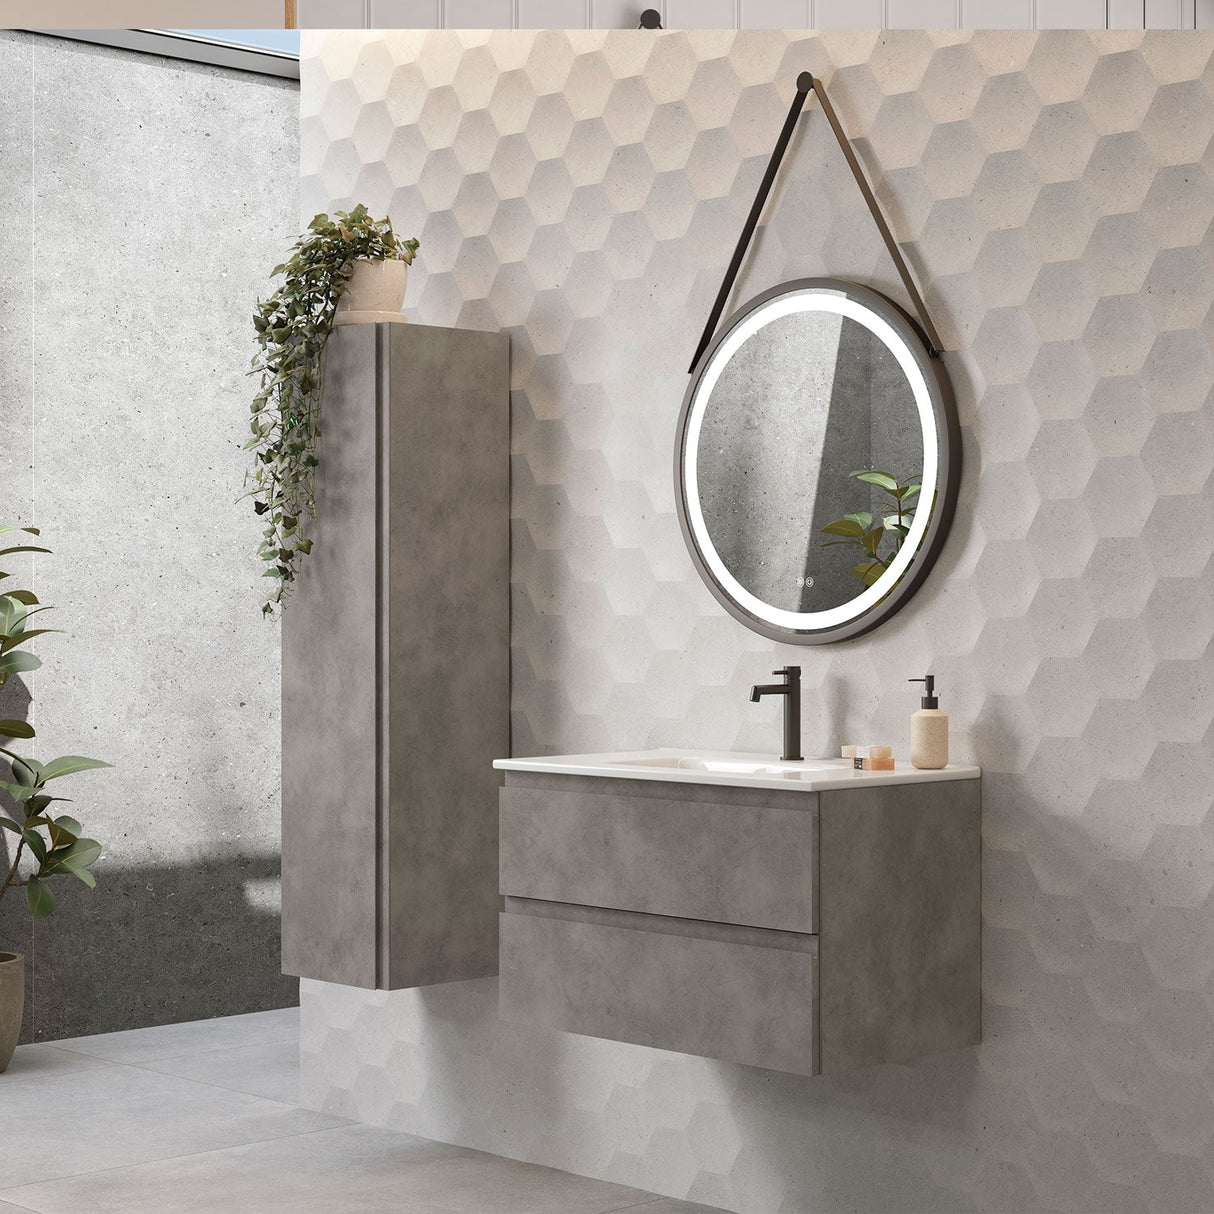 DAX Pasadena Vanity Cabinet with Onix Basin, 32", Cement DAX-PAS013281-ONX